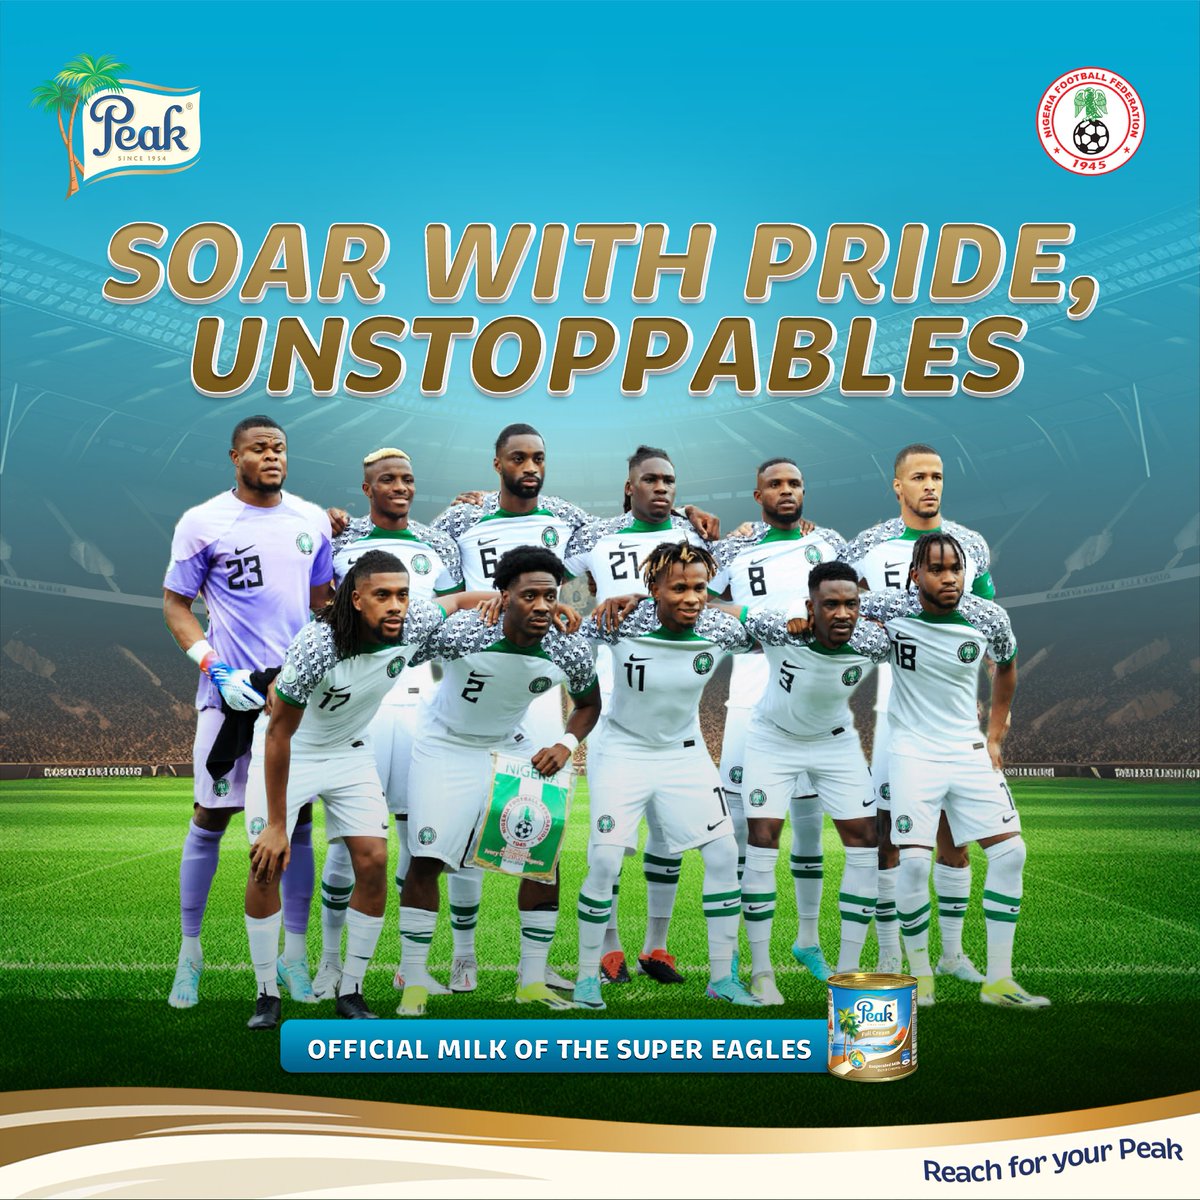 We celebrate the Unstoppable @NGSuperEagles for their incredible performance at the 2023 AFCON. You gave your best and we are proud of you. #PeakMilk #SuperEagles